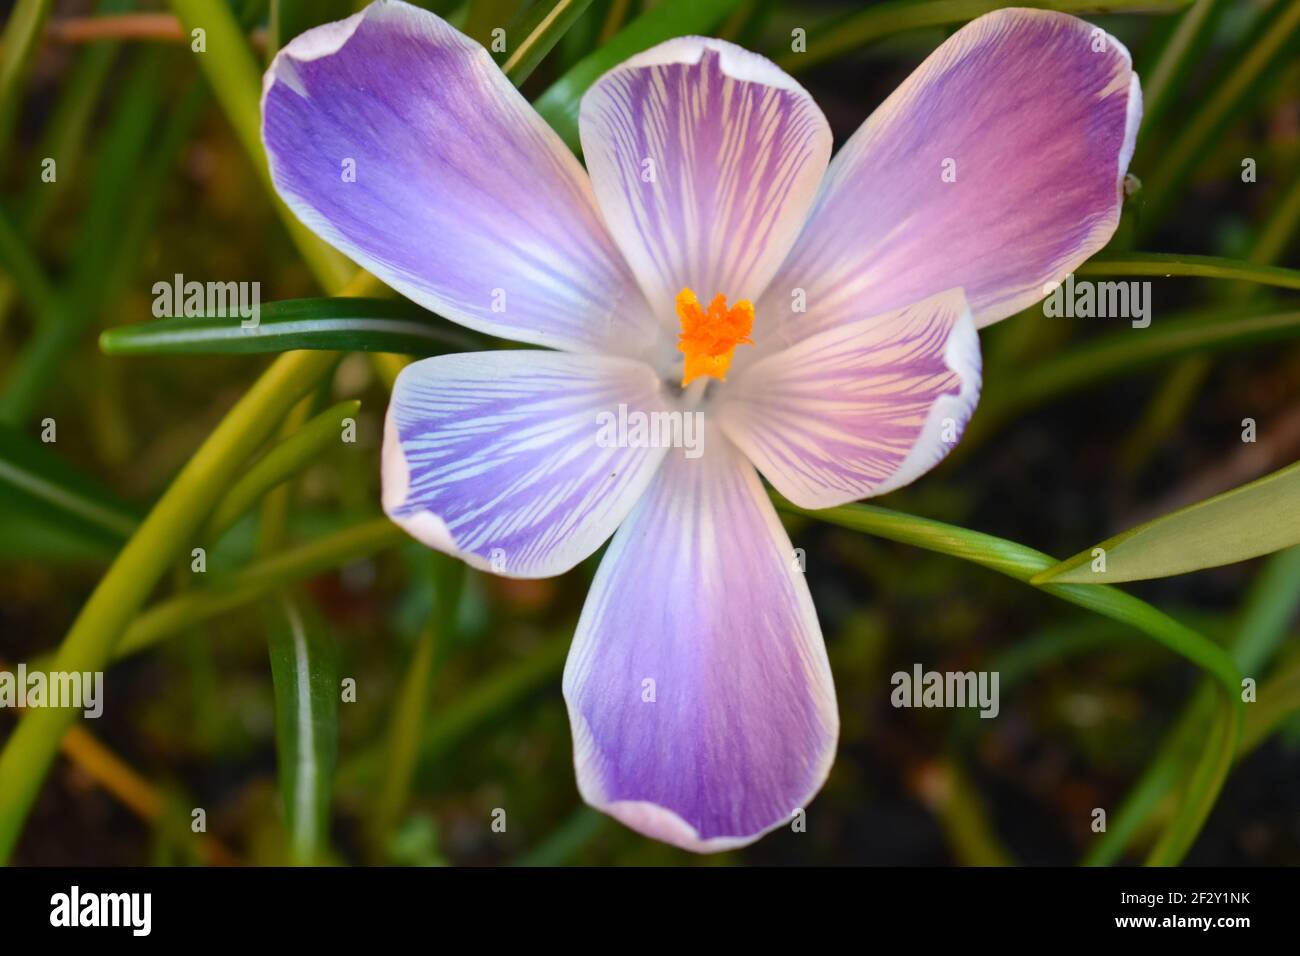 Dutch crocus is spring blooming bulb with large yellow white purple to striped and bronze flowers It grows tall planted in rock gardens or flower beds Stock Photo